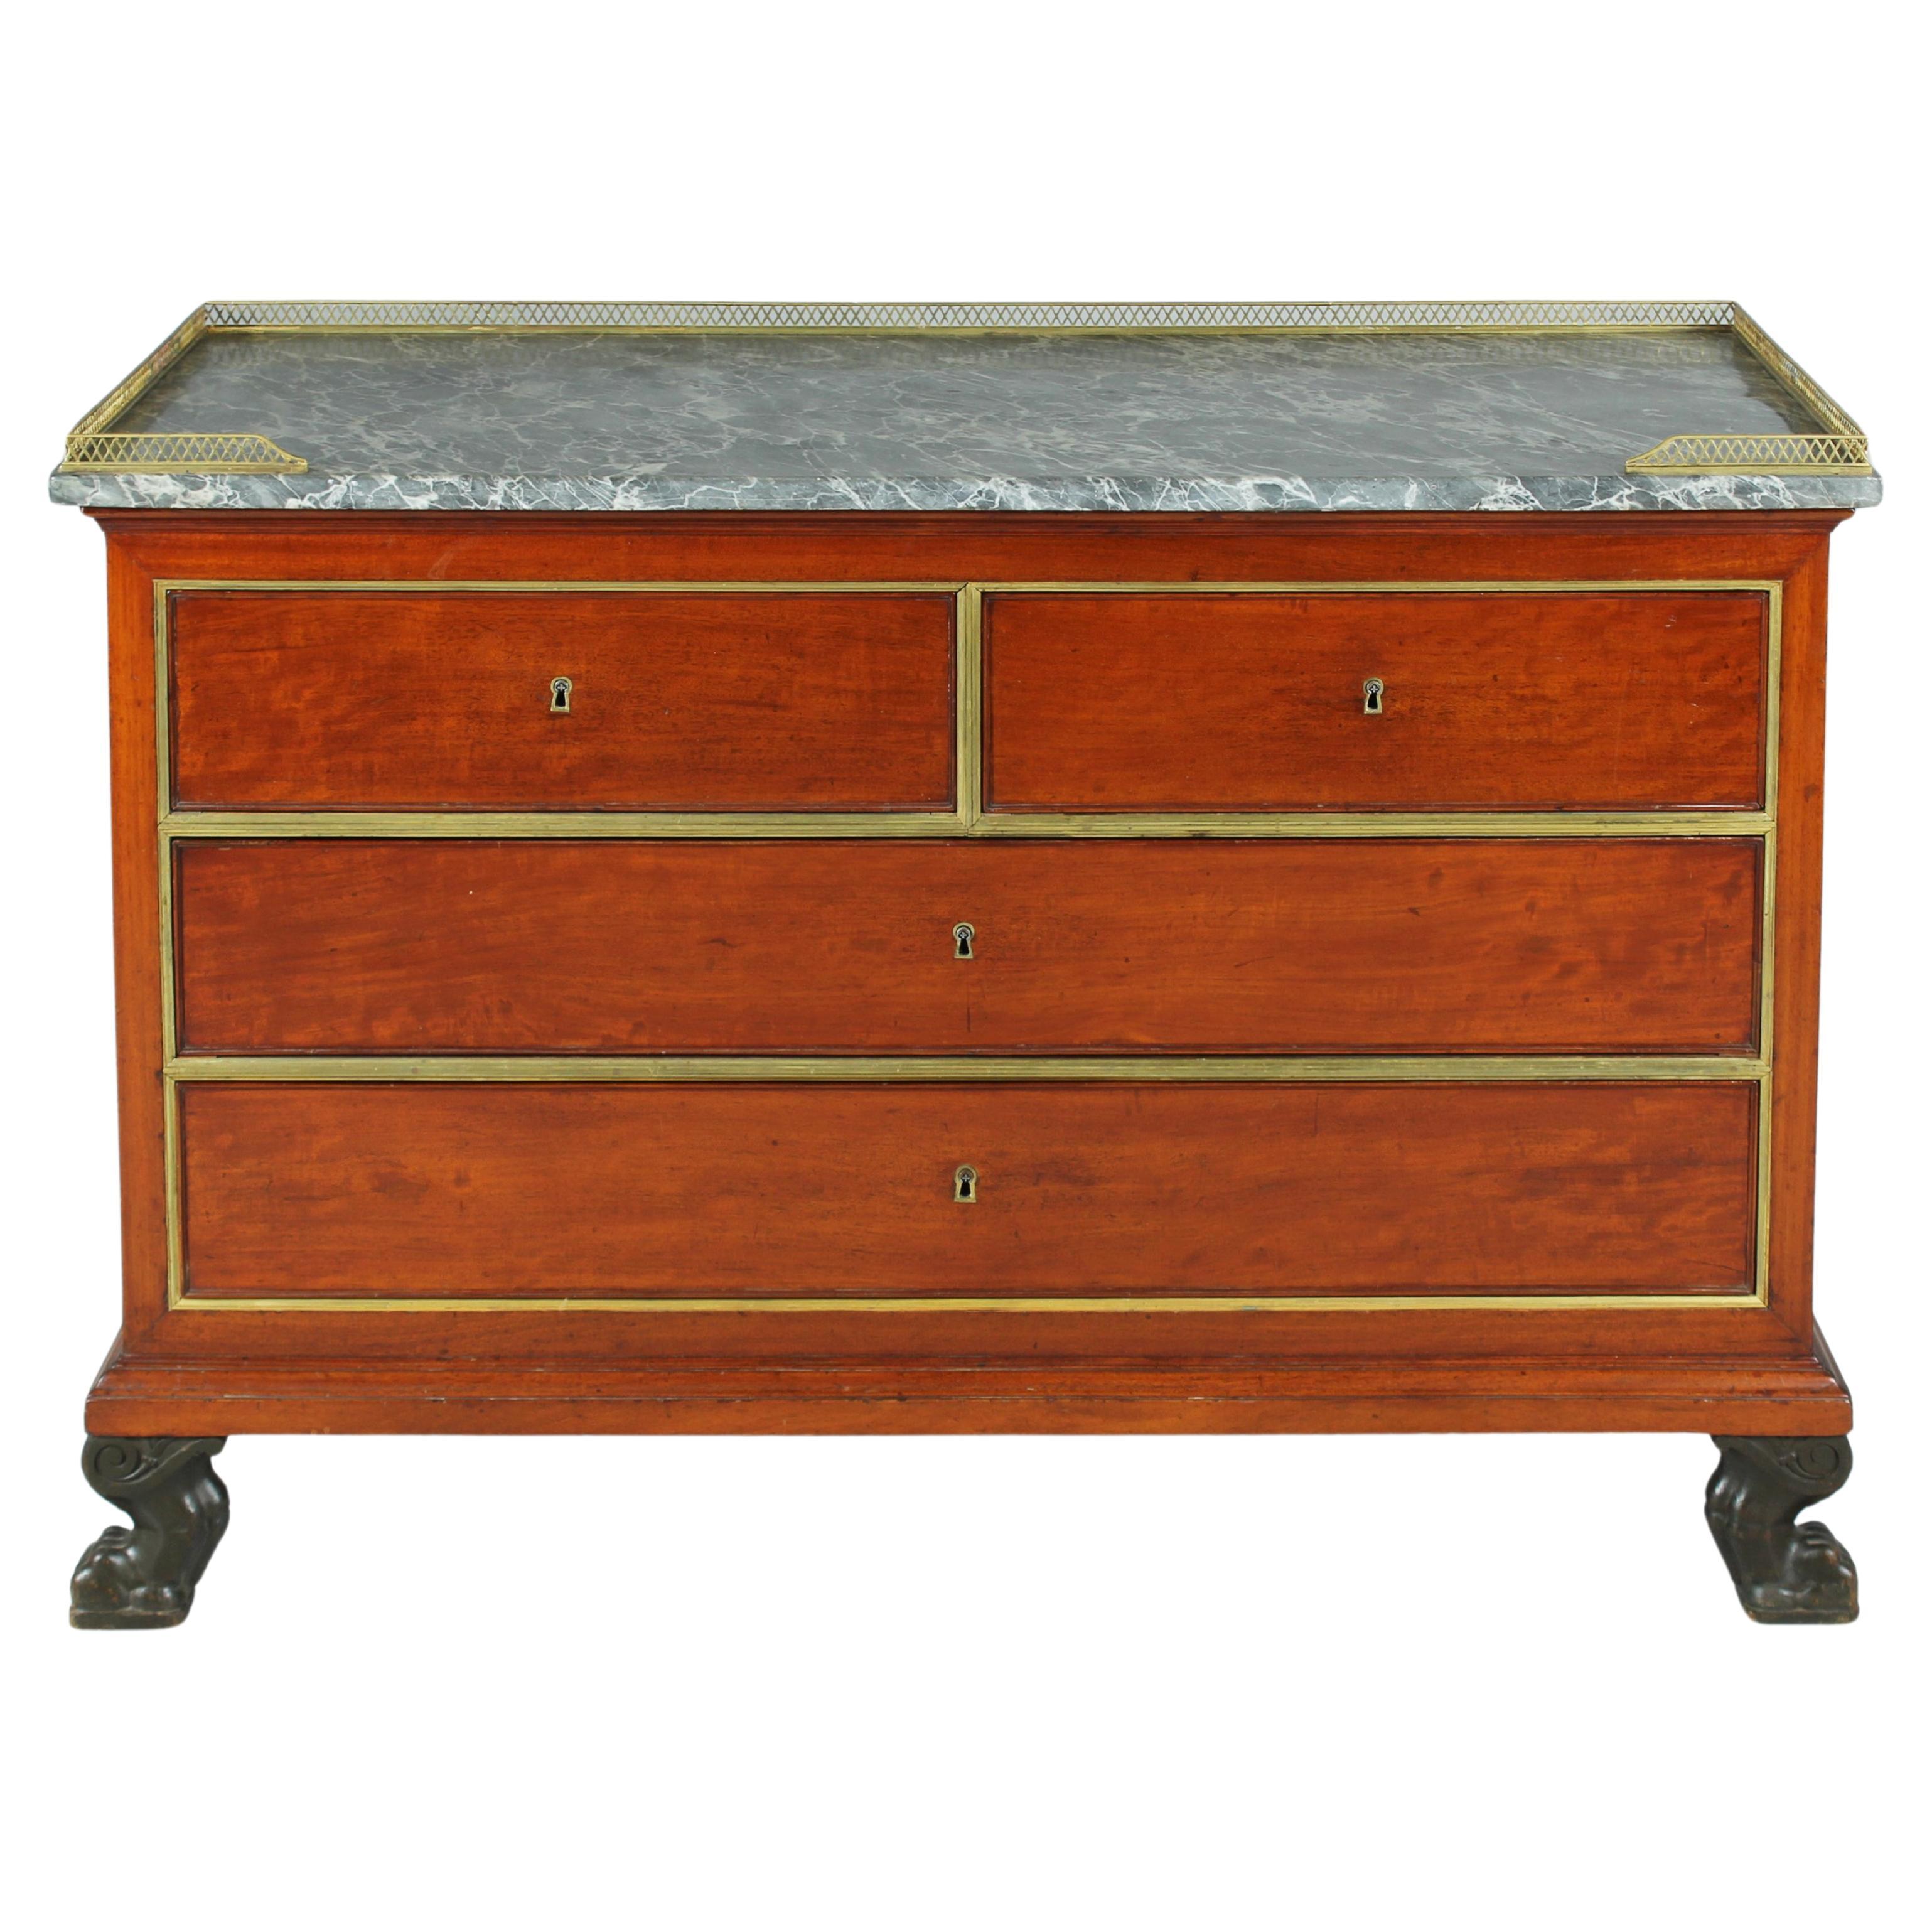 Mahogany Empire Chest Of Drawers, Stamped Jacob Frères Rue Meslée, Paris c. 1800 For Sale